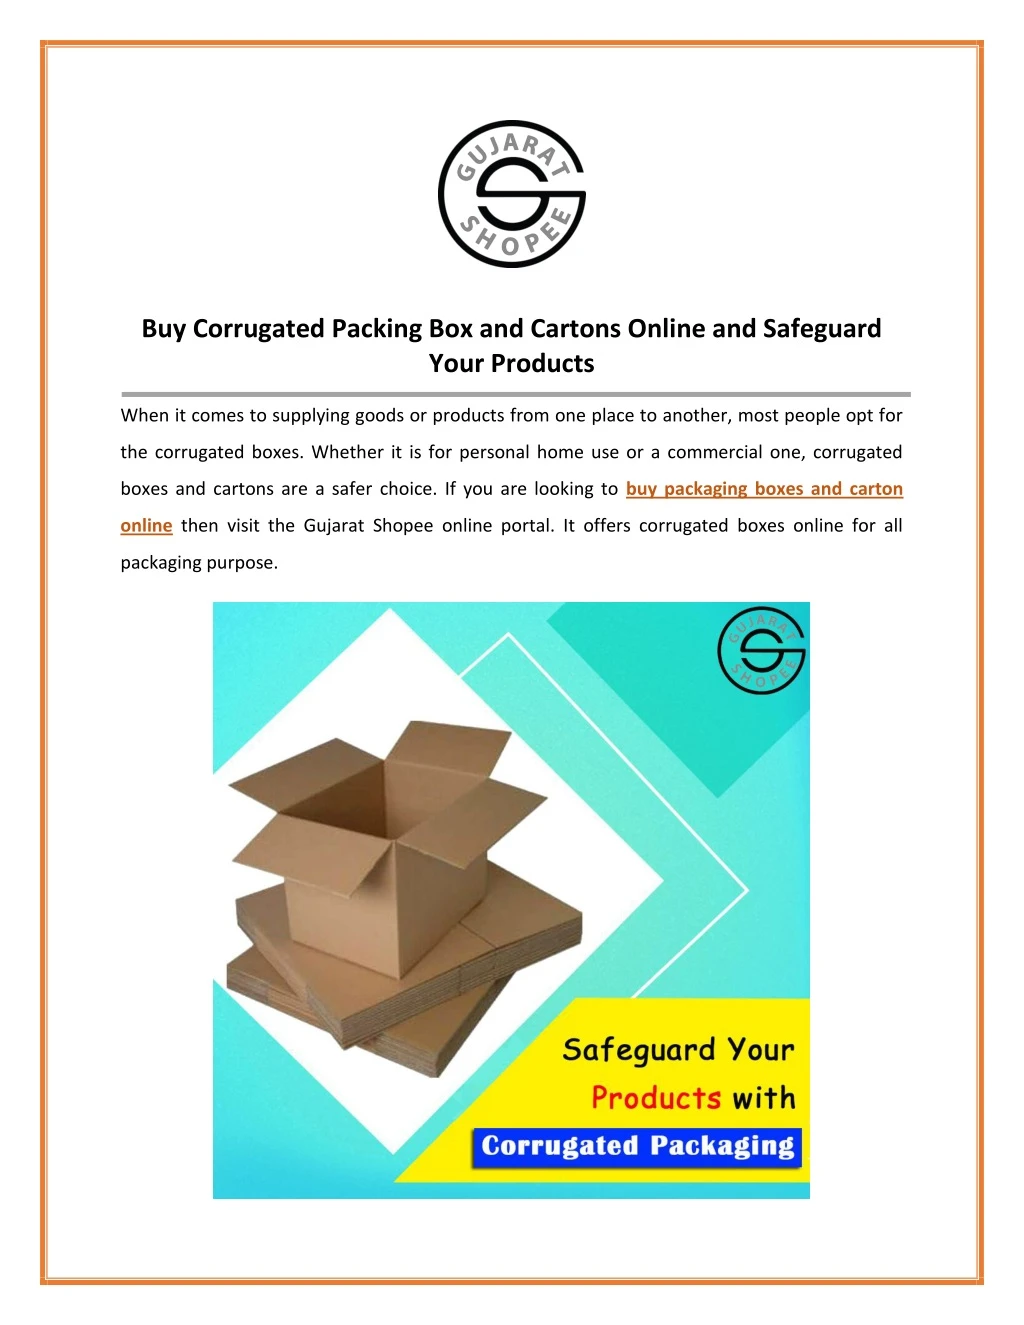 buy corrugated packing box and cartons online